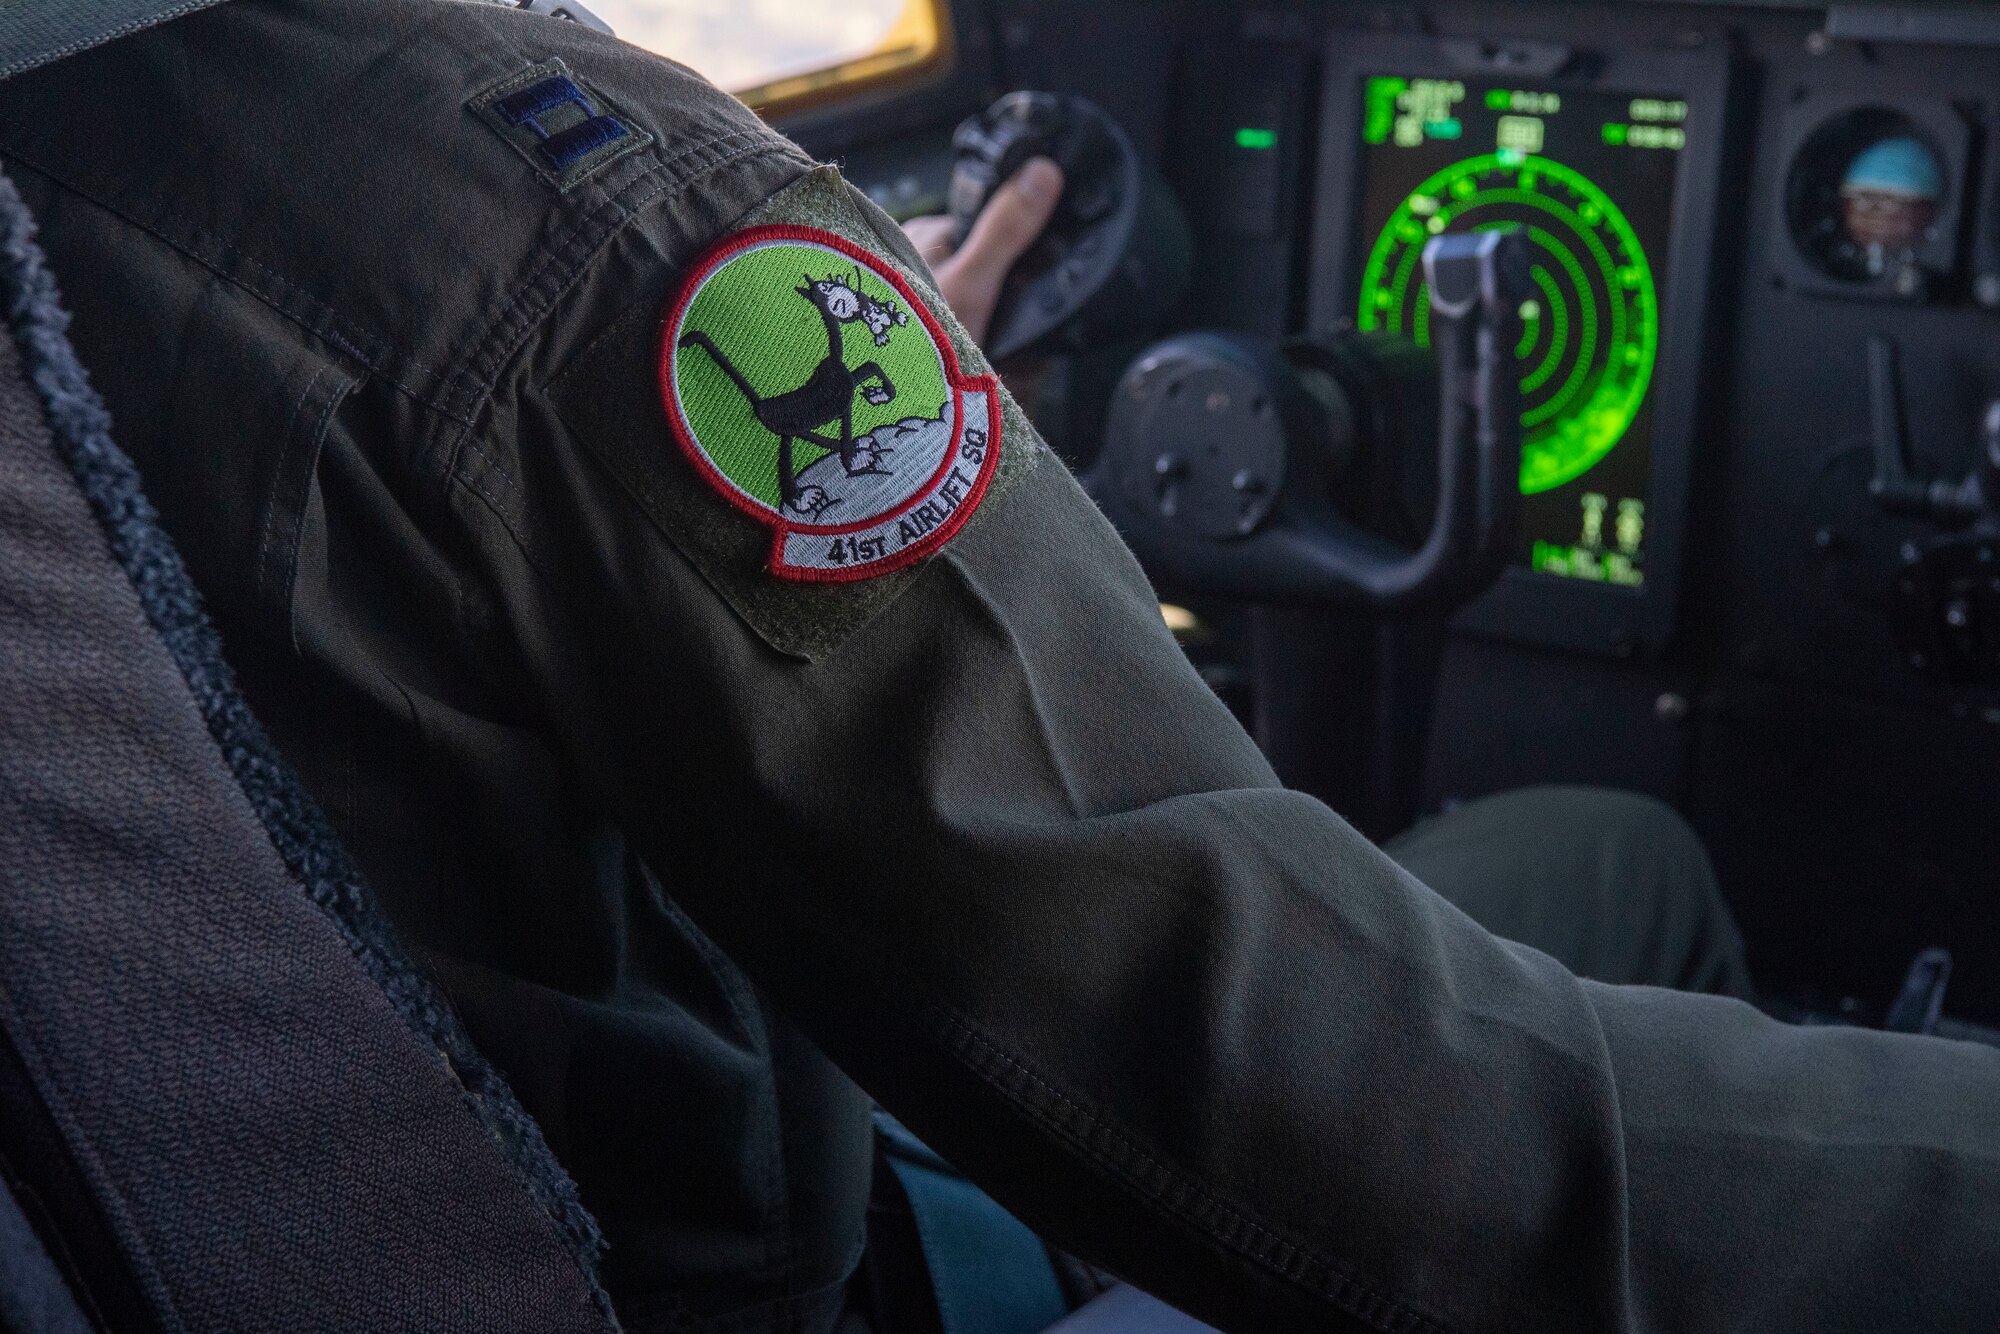 Pilots from the 41st Airlift Squadron fly a C-130J Super Hercules during pre-deployment training in Colorado, July 30, 2020. Throughout the training, the 41st AS was able to perform airdrops, offload cargo, fly low-levels, land on dirt runways, integrate with other wings, operate in low-light environments and navigate topography that the squadron is unable to replicate at home station. (U.S. Air Force photo by Airman 1st Class Aaron Irvin)